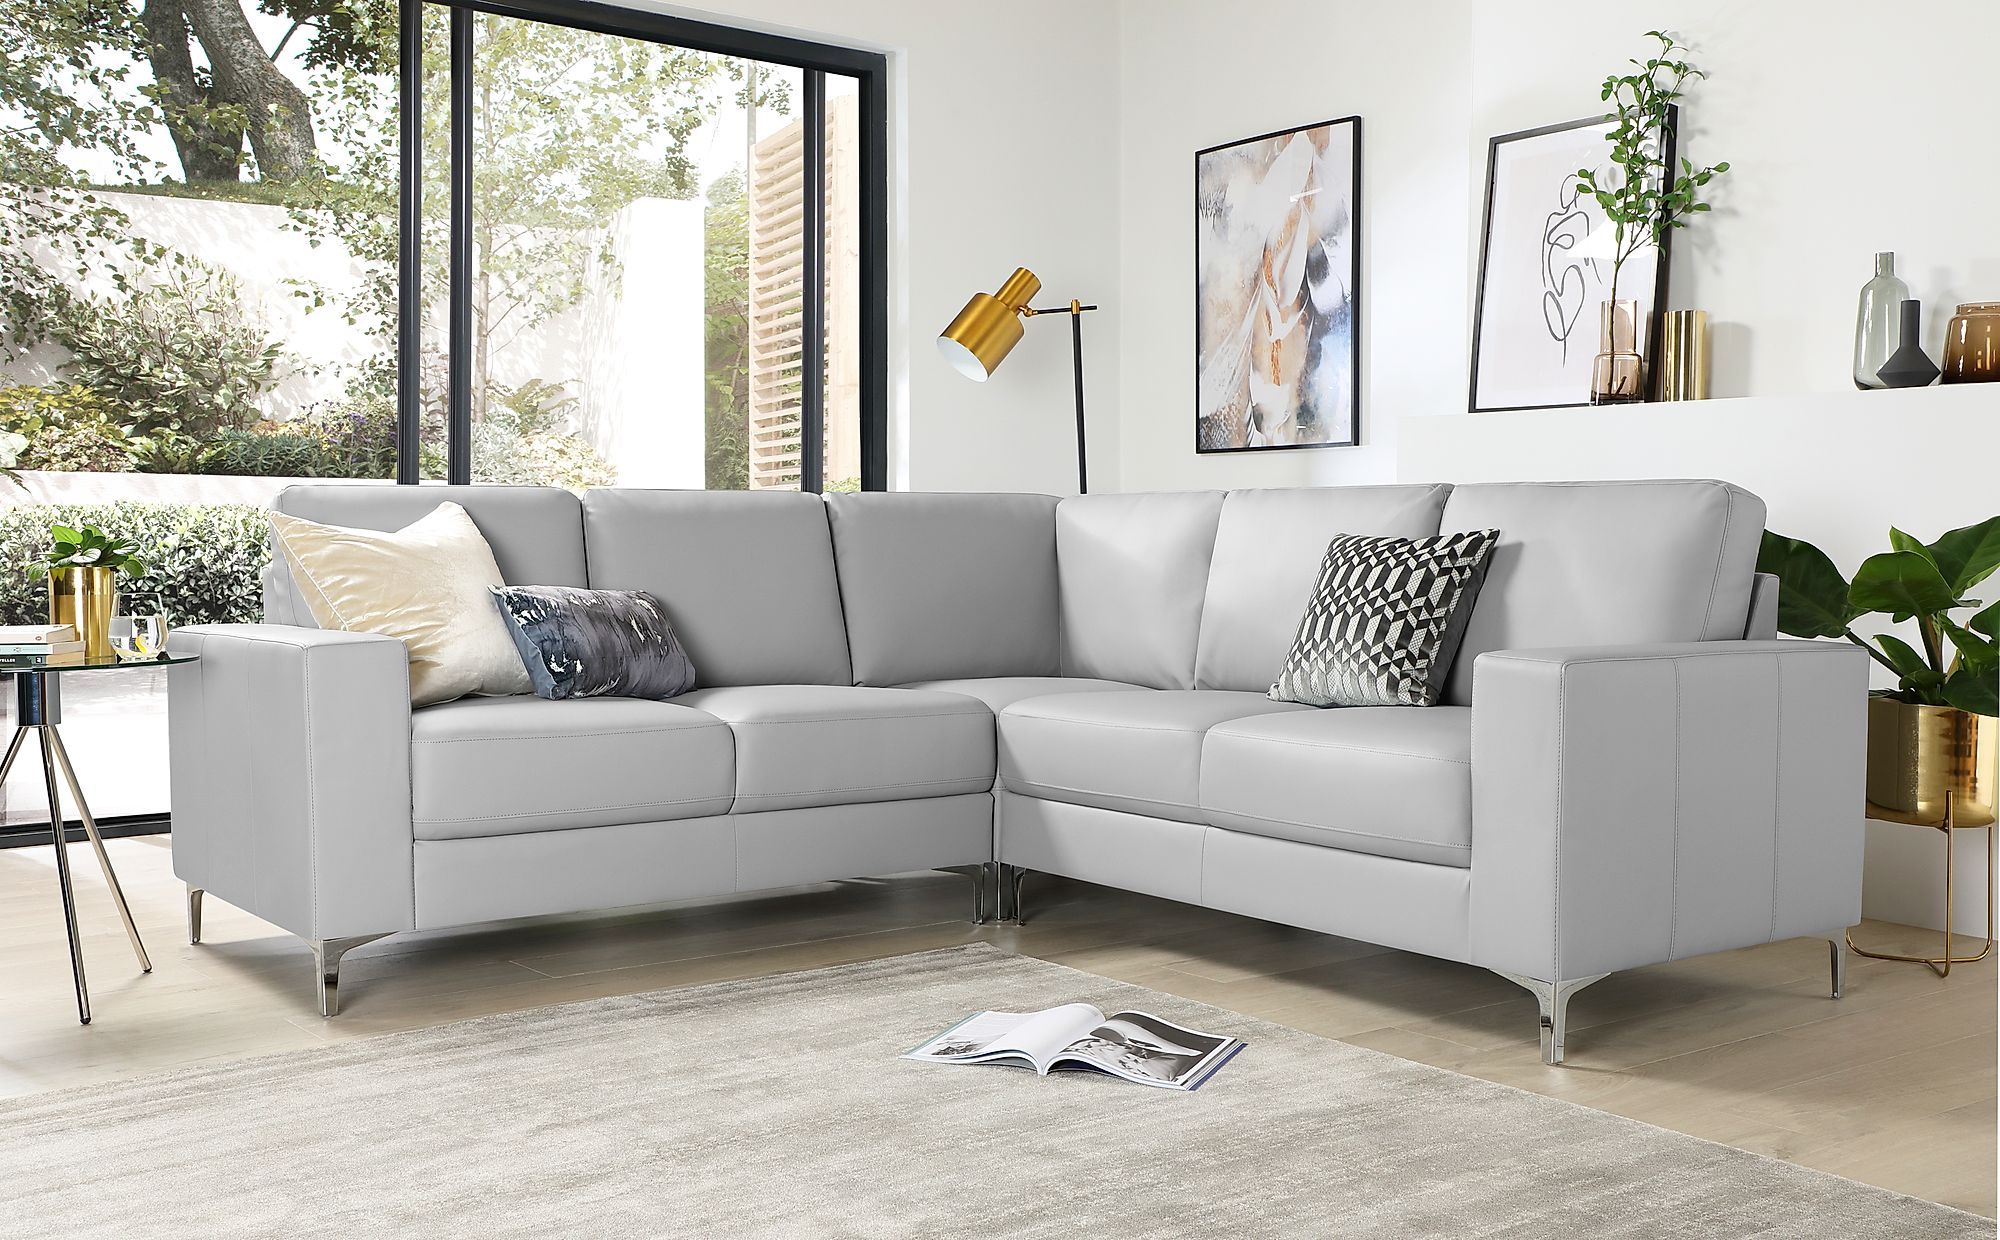 Baltimore Light Grey Leather Corner Sofa | Furniture Choice Throughout Sofas In Light Grey (View 13 of 20)